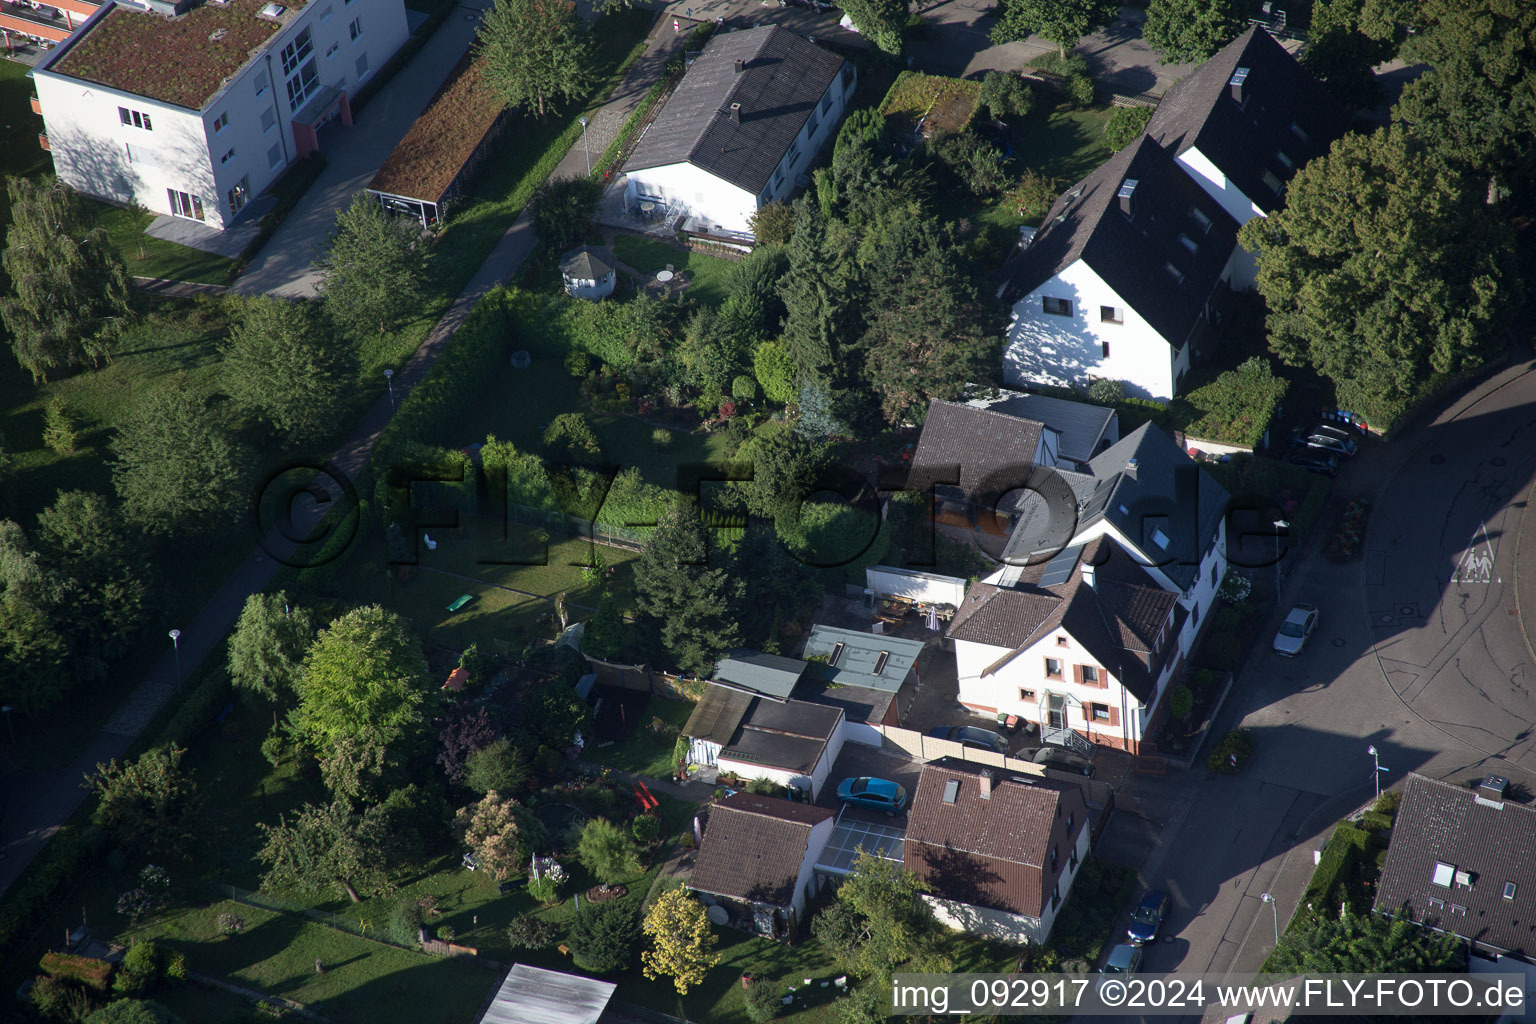 New way in the district Hohenwettersbach in Karlsruhe in the state Baden-Wuerttemberg, Germany from above